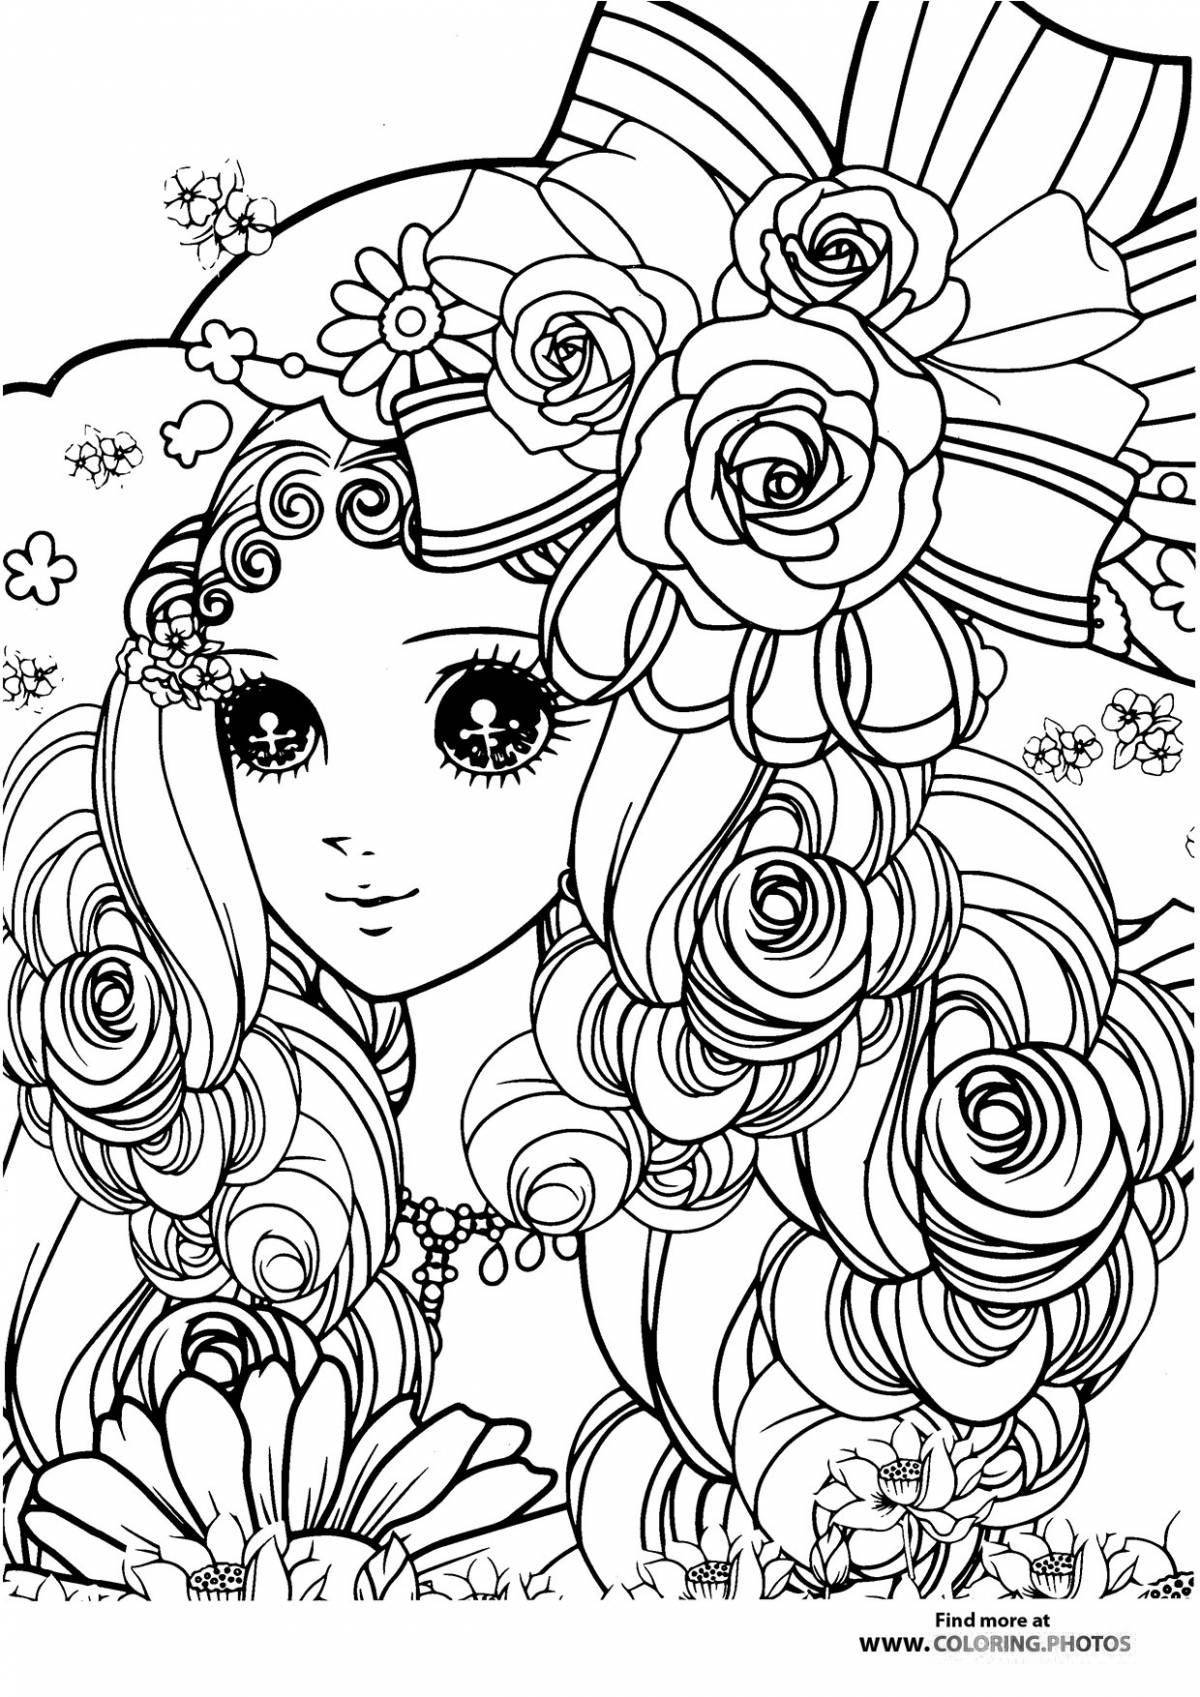 Adorable coloring book for girls 2022